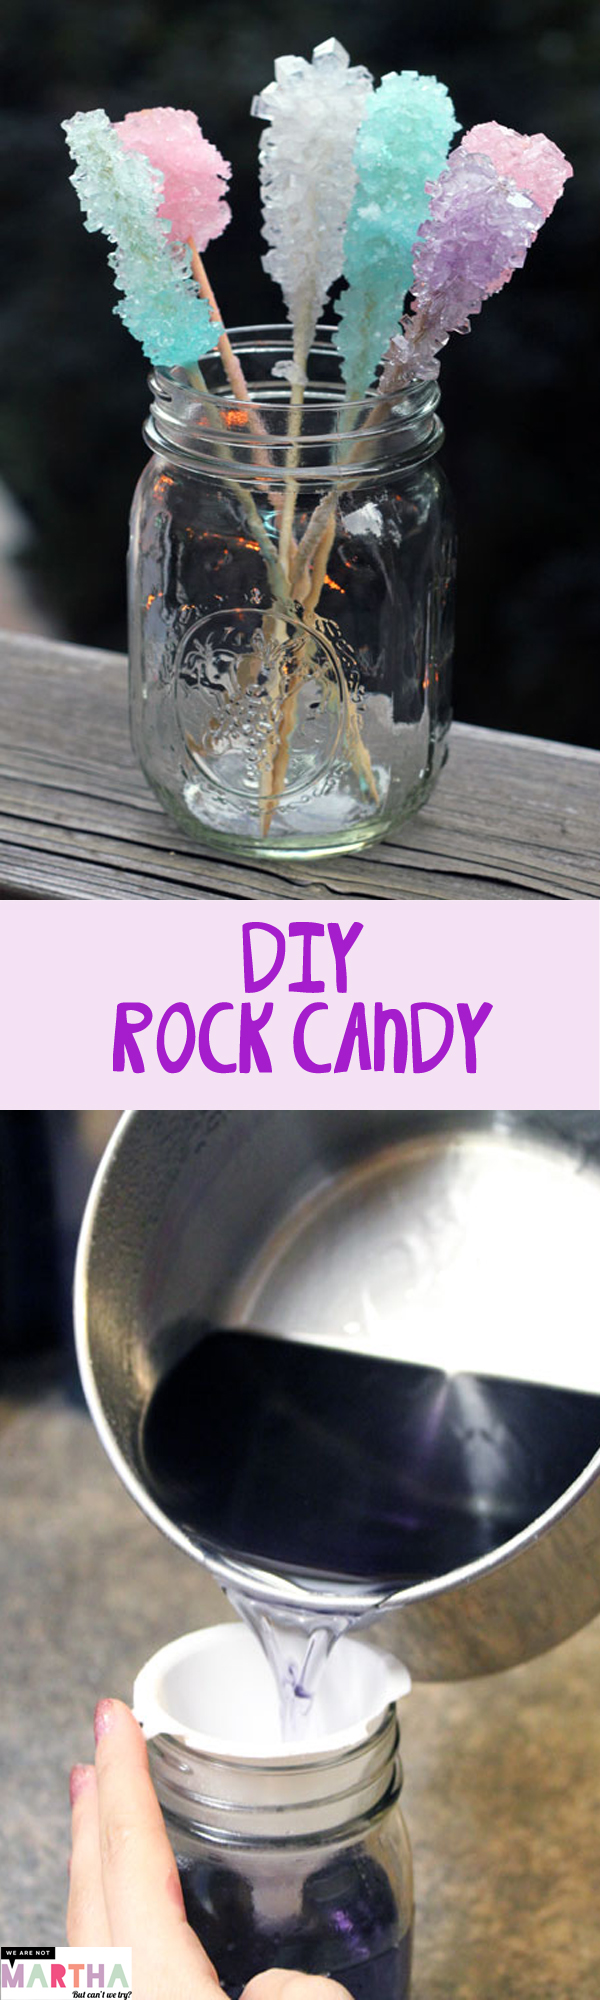 Make Your Own Diy Rock Candy We Are Not Martha,Smoked Sausage Recipes With Potatoes And Peppers